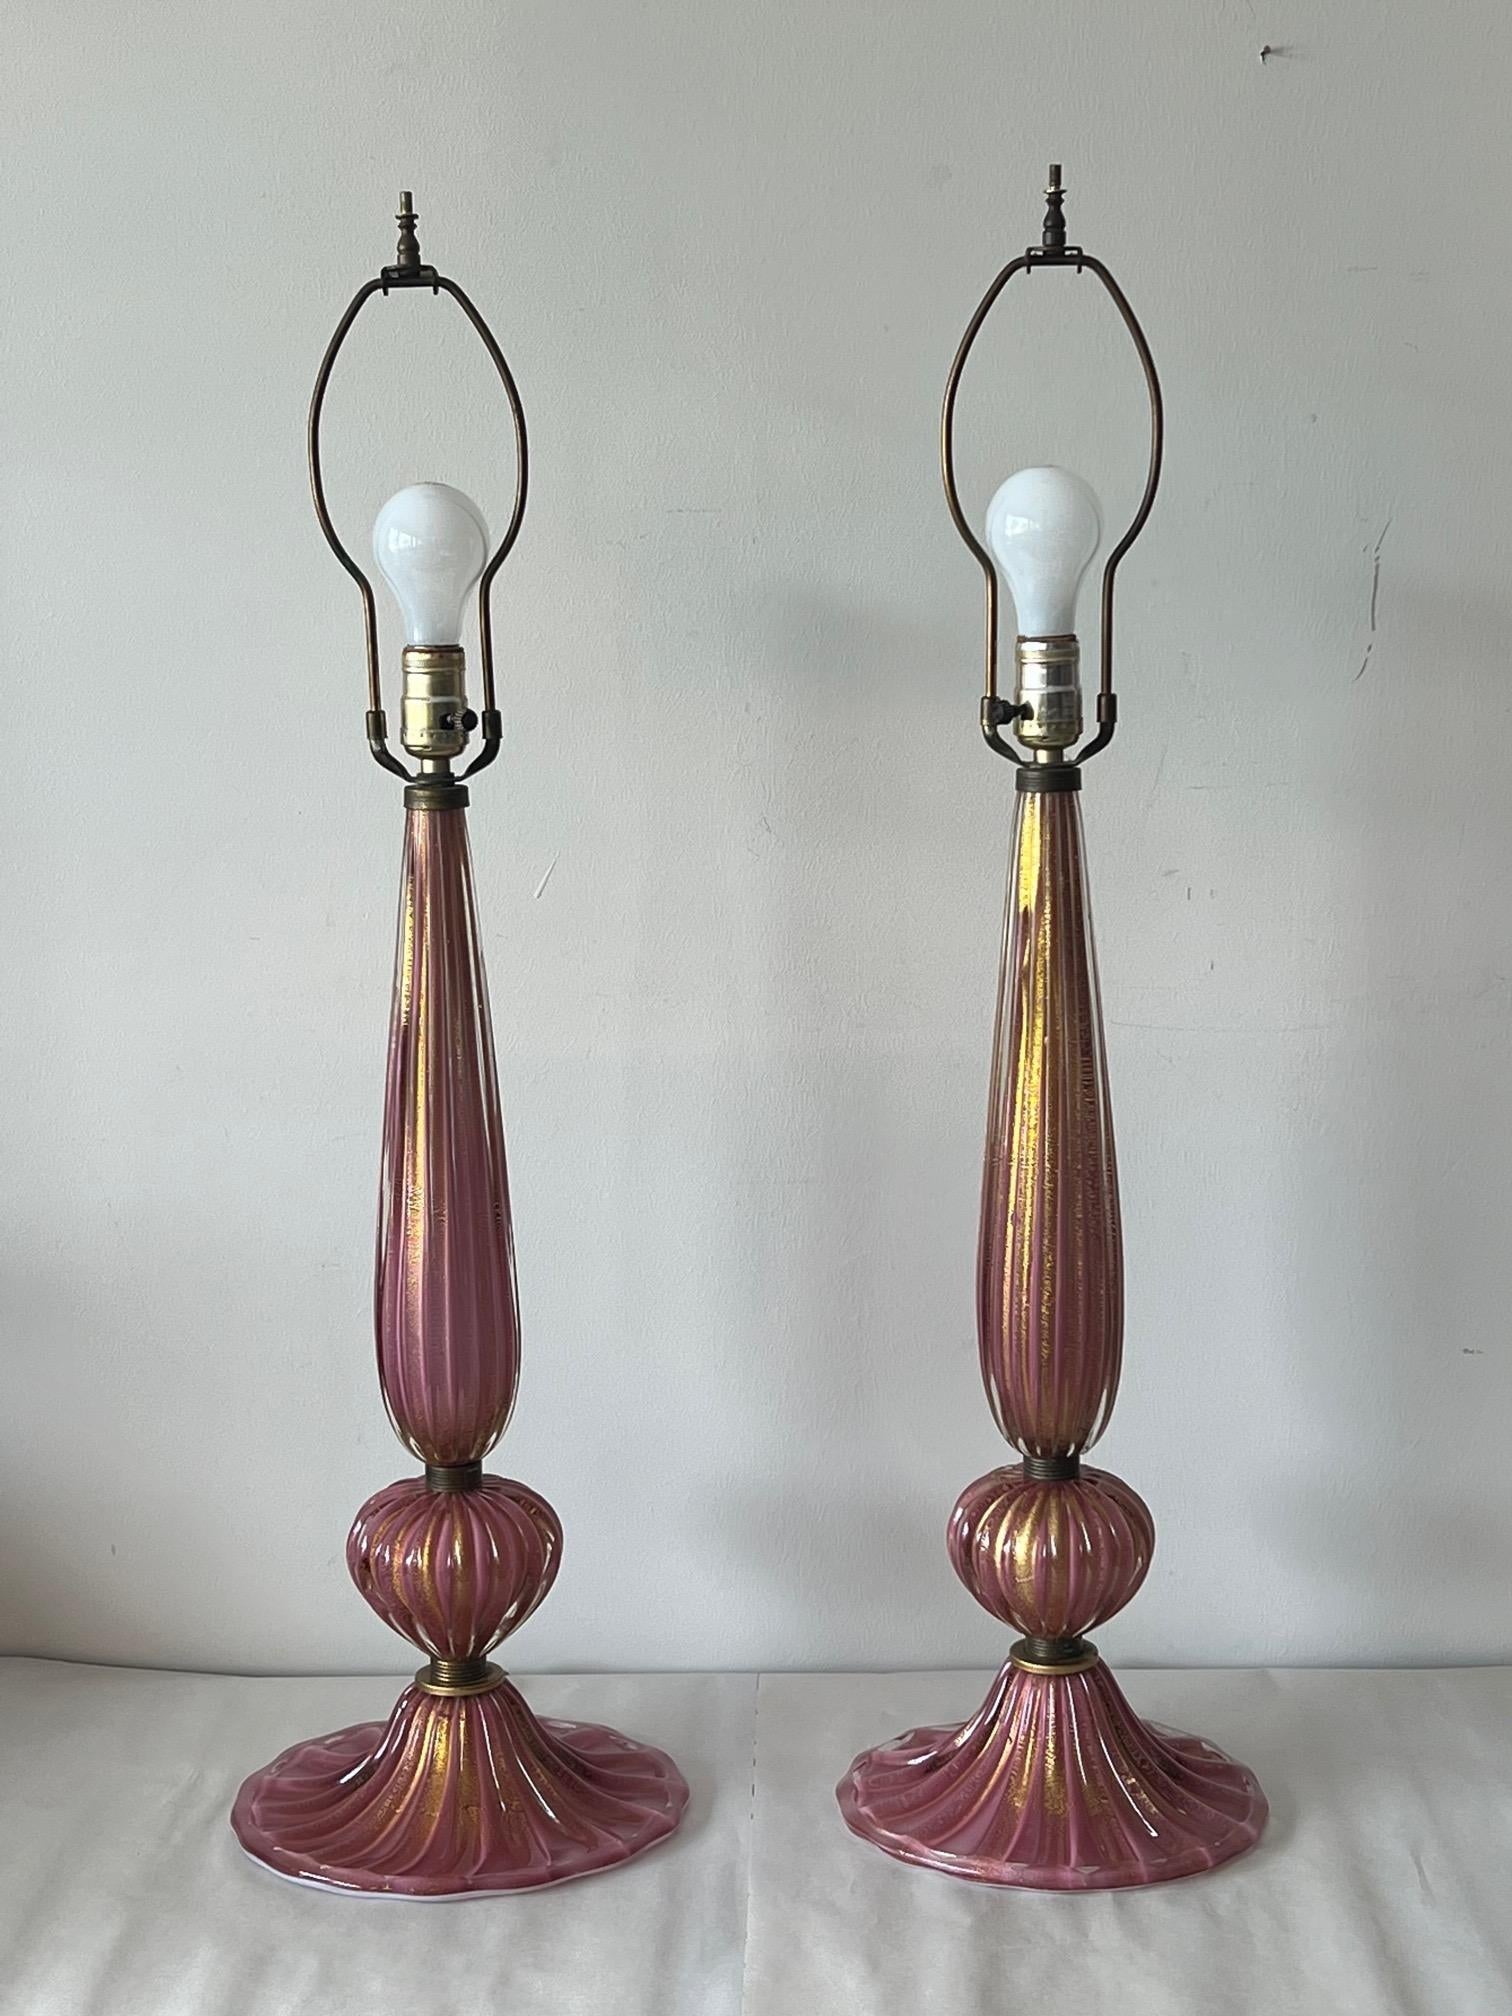 A pair of beautiful and rare to find Murano glass, pink/lavender table lamps with gold flecks. Ca' 1950s, most likely by Barovier, with original harps/wiring-from the original owners. The lamps are approx. 9